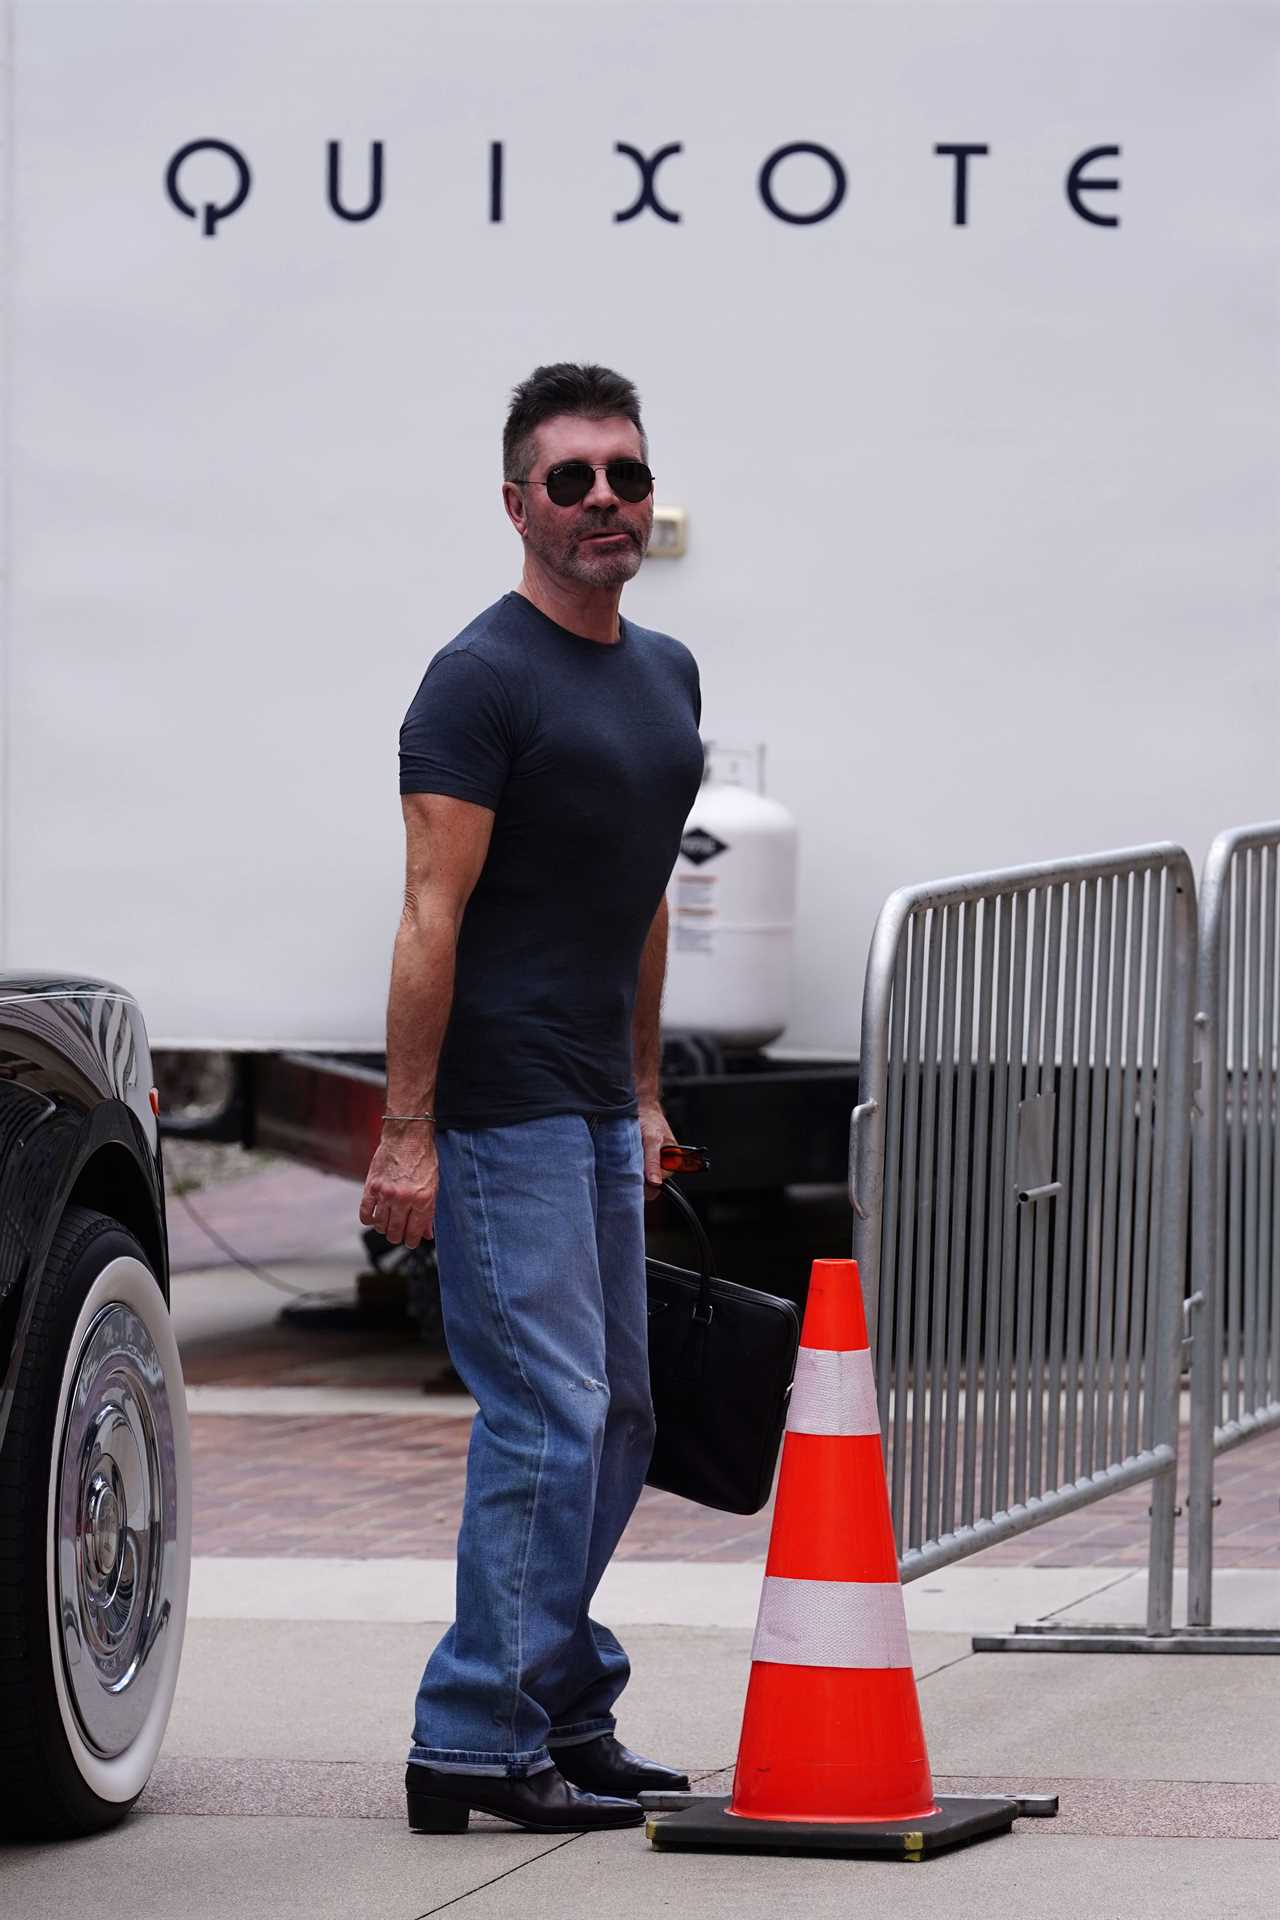 Simon Cowell looks slimmer than ever in tight T-shirt and shades as he heads to filming on America’s Got Talent